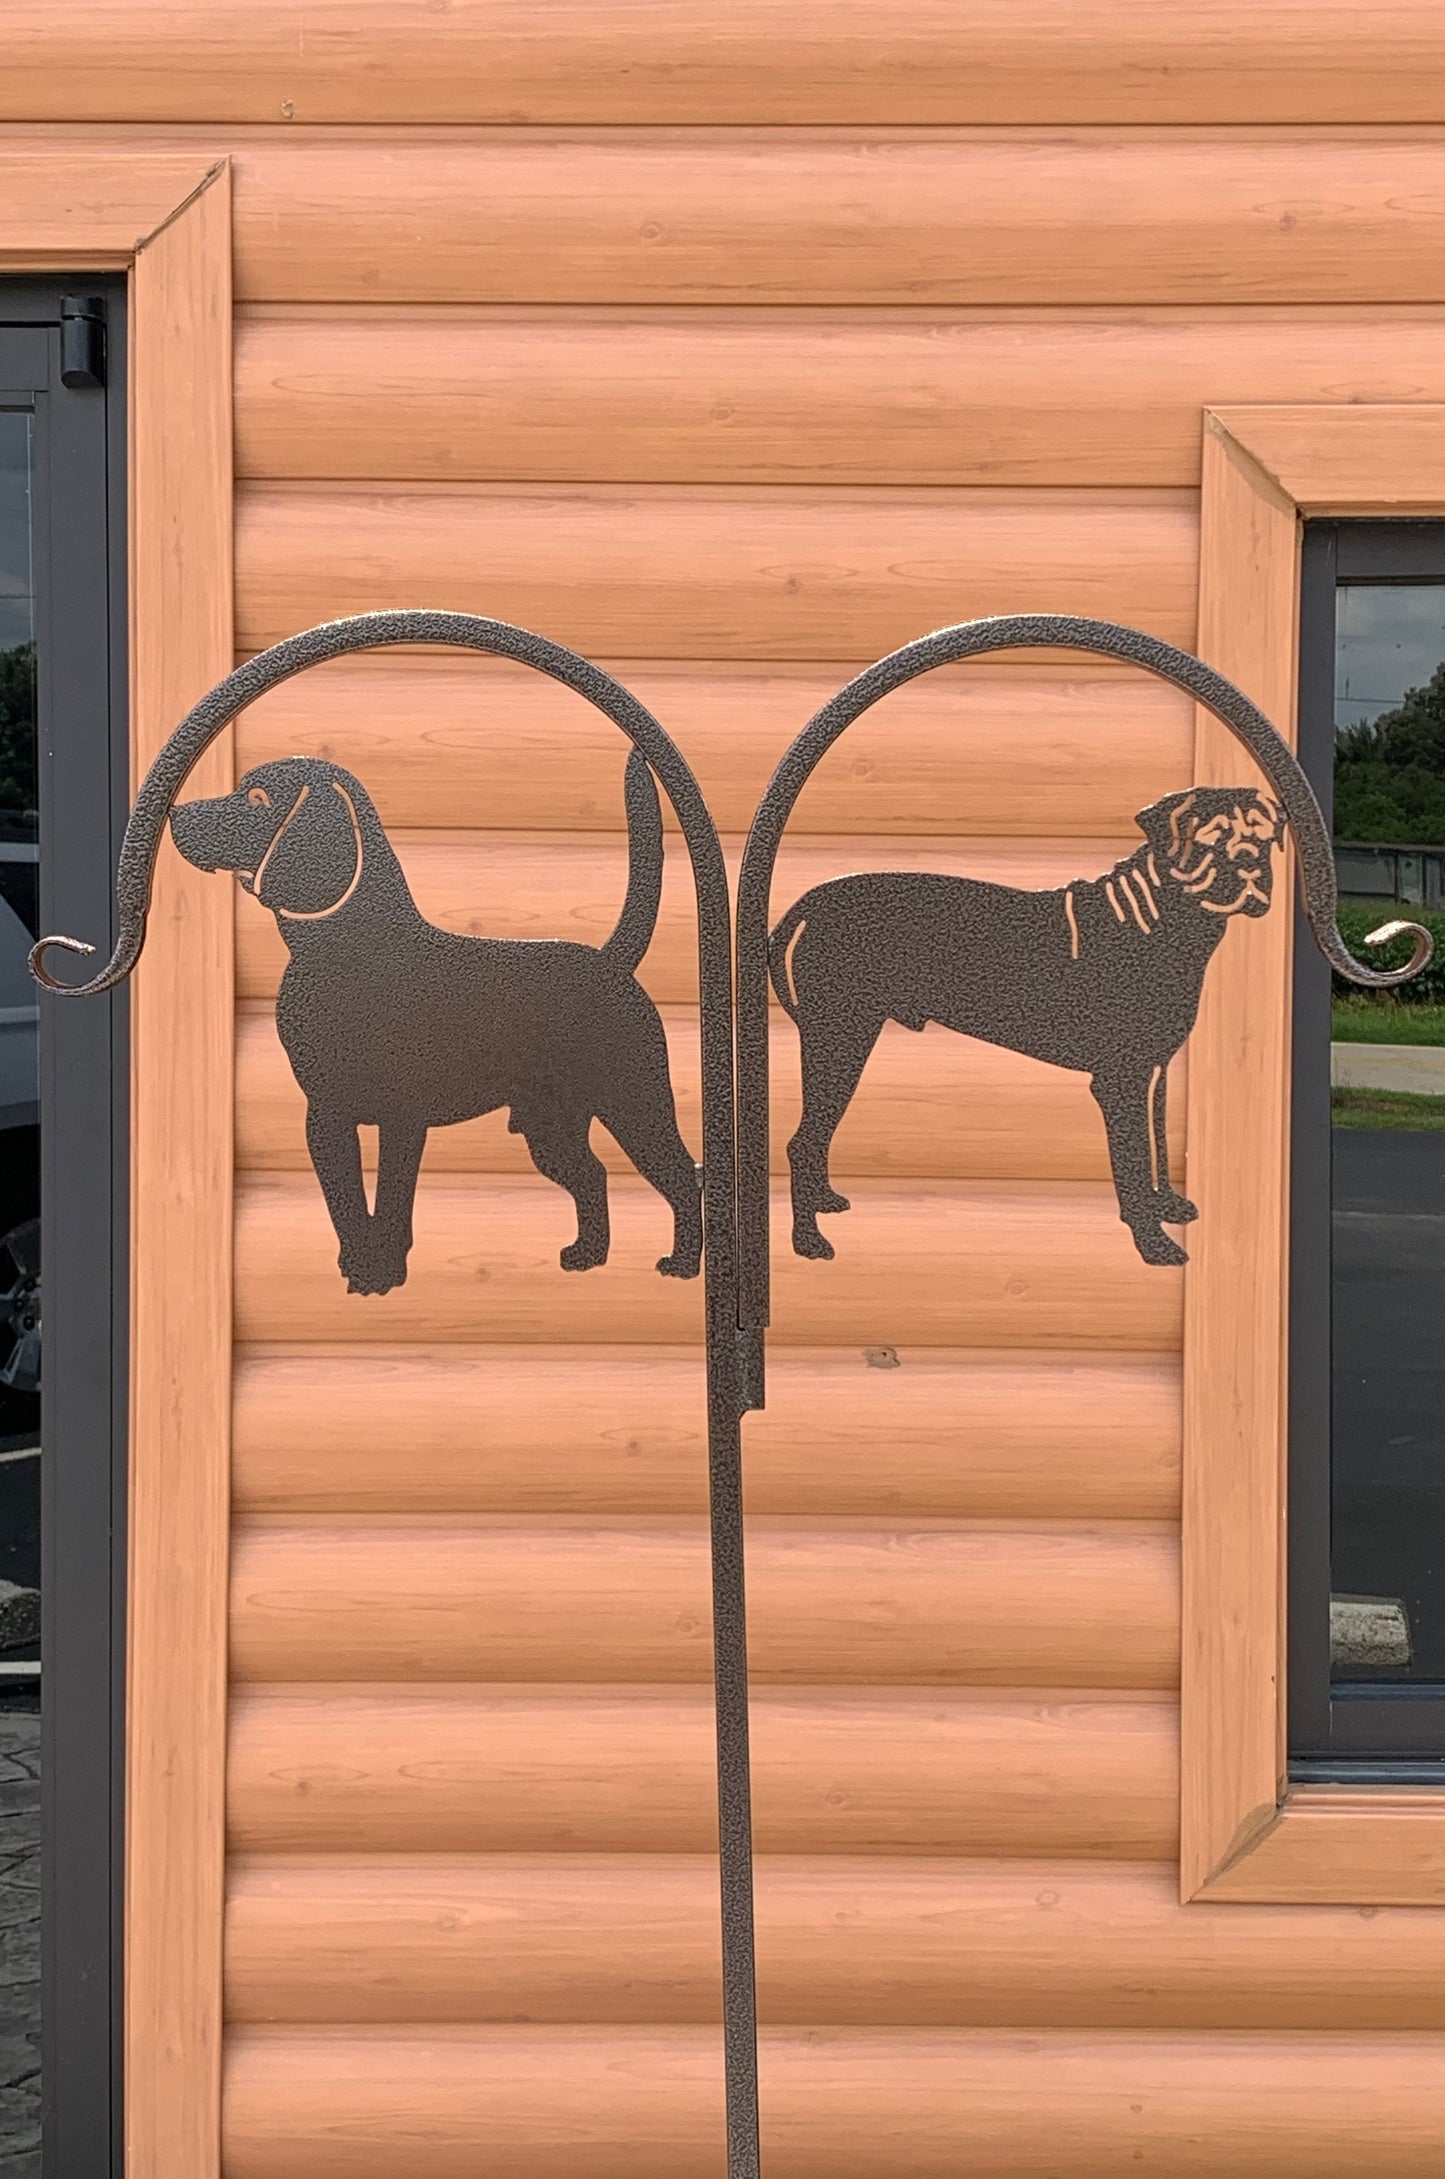 Double Custom Pet Display Shepherd Hook- Your Color Choice-Four Display Options